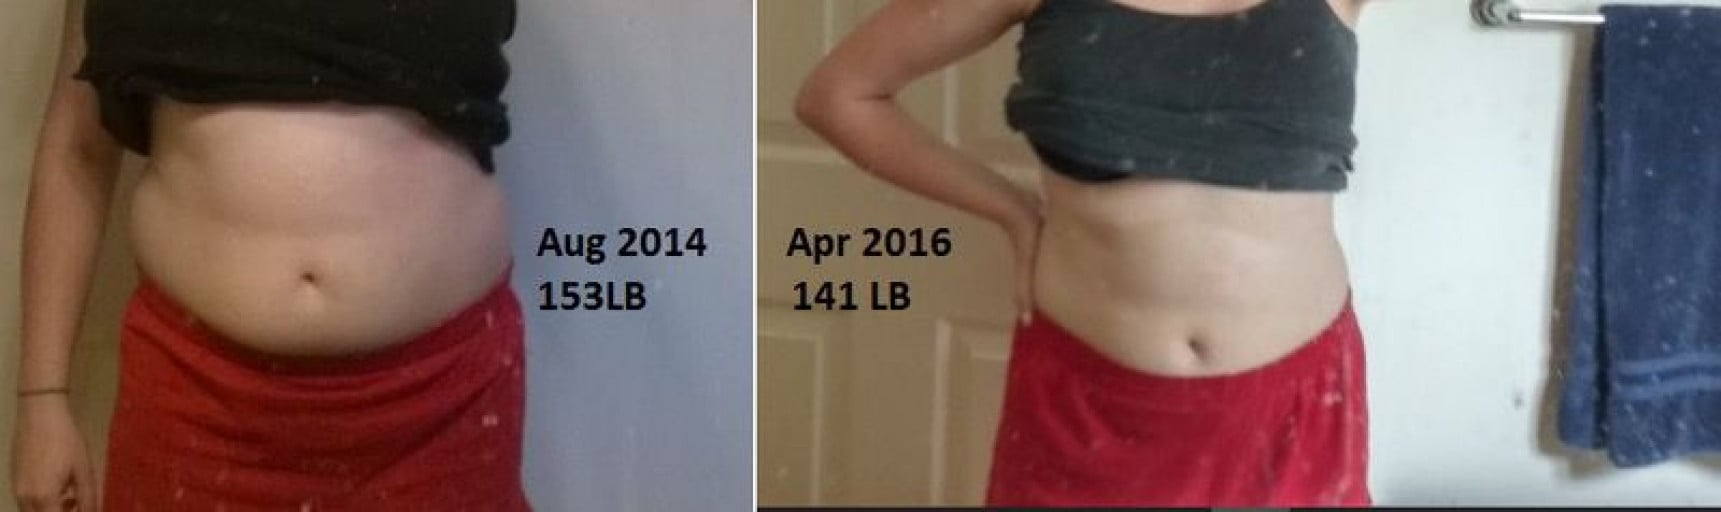 A before and after photo of a 5'5" female showing a weight reduction from 153 pounds to 141 pounds. A total loss of 12 pounds.